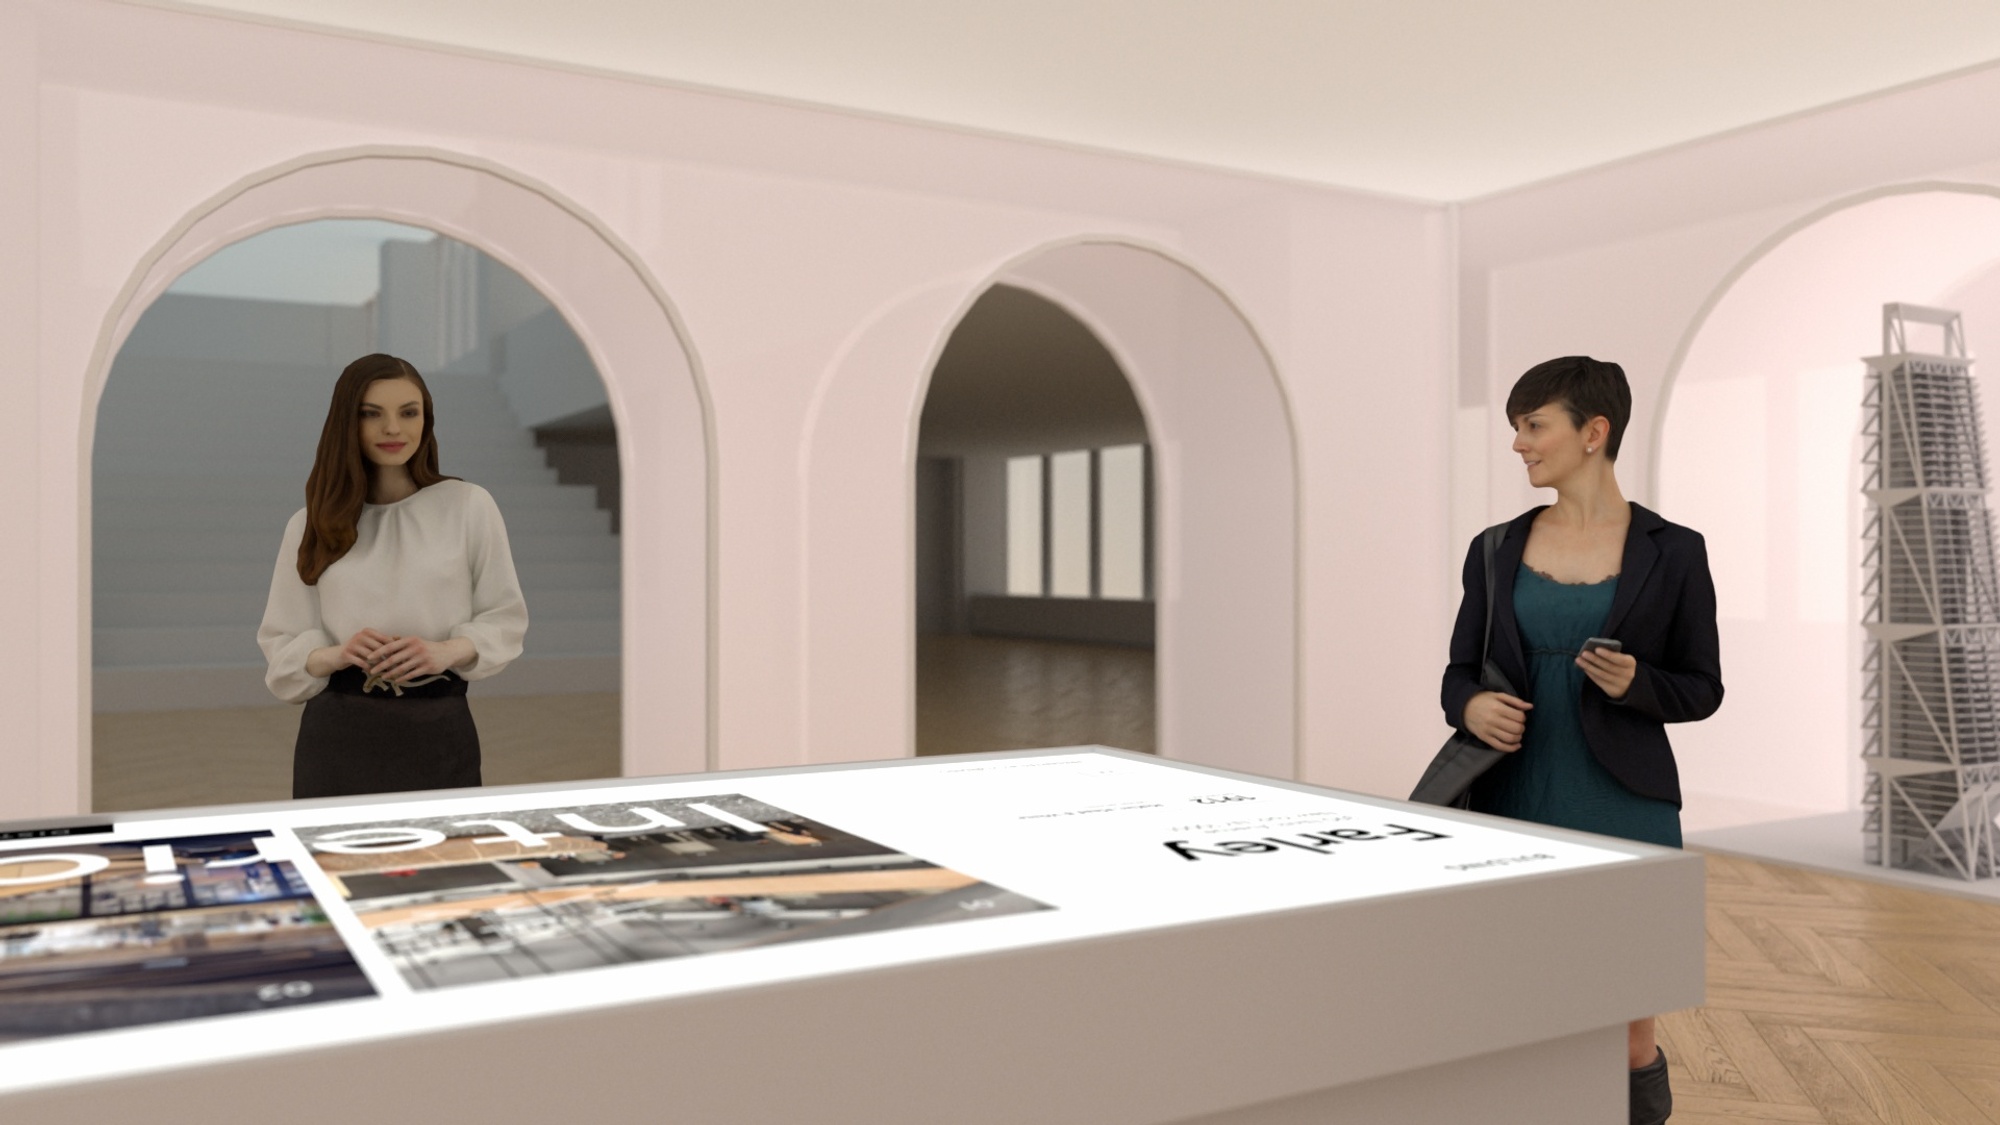 Two women standing at digital table, with architectural models in background